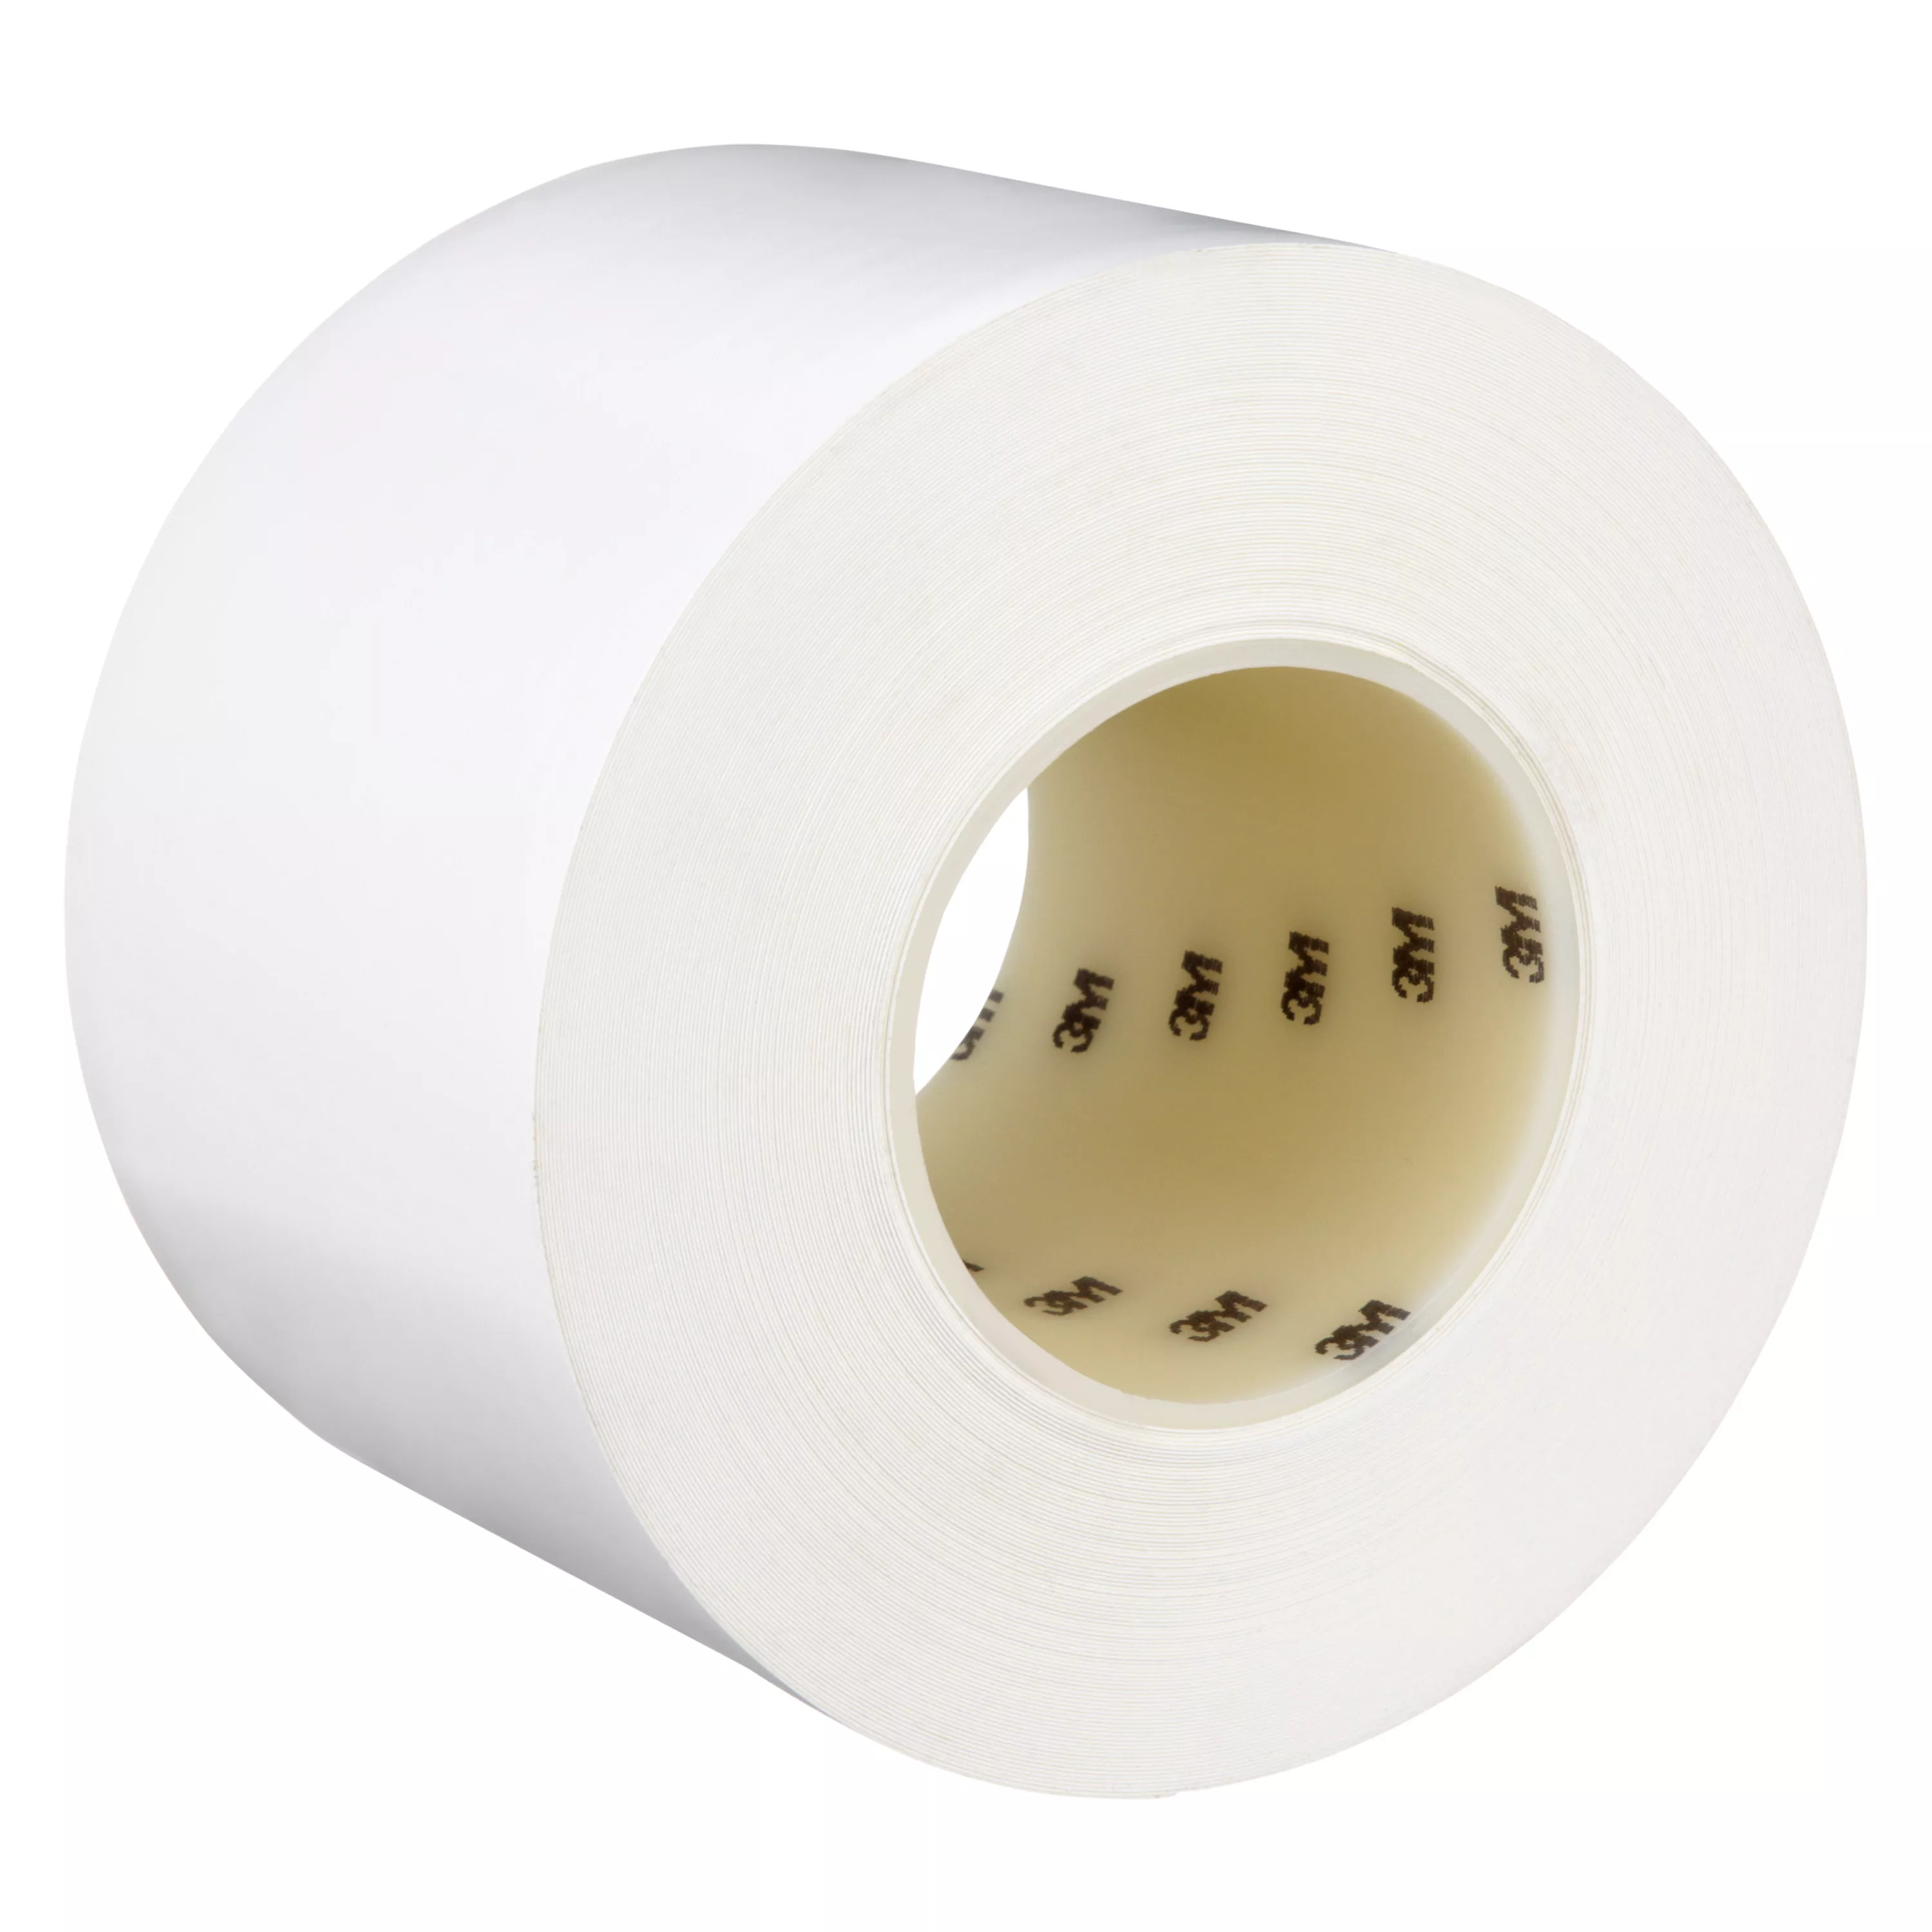 3M™ Durable Floor Marking Tape 971, White, 4 in x 36 yd, 17 mil, 3 Rolls/Case, Individually Wrapped Conveniently Packaged